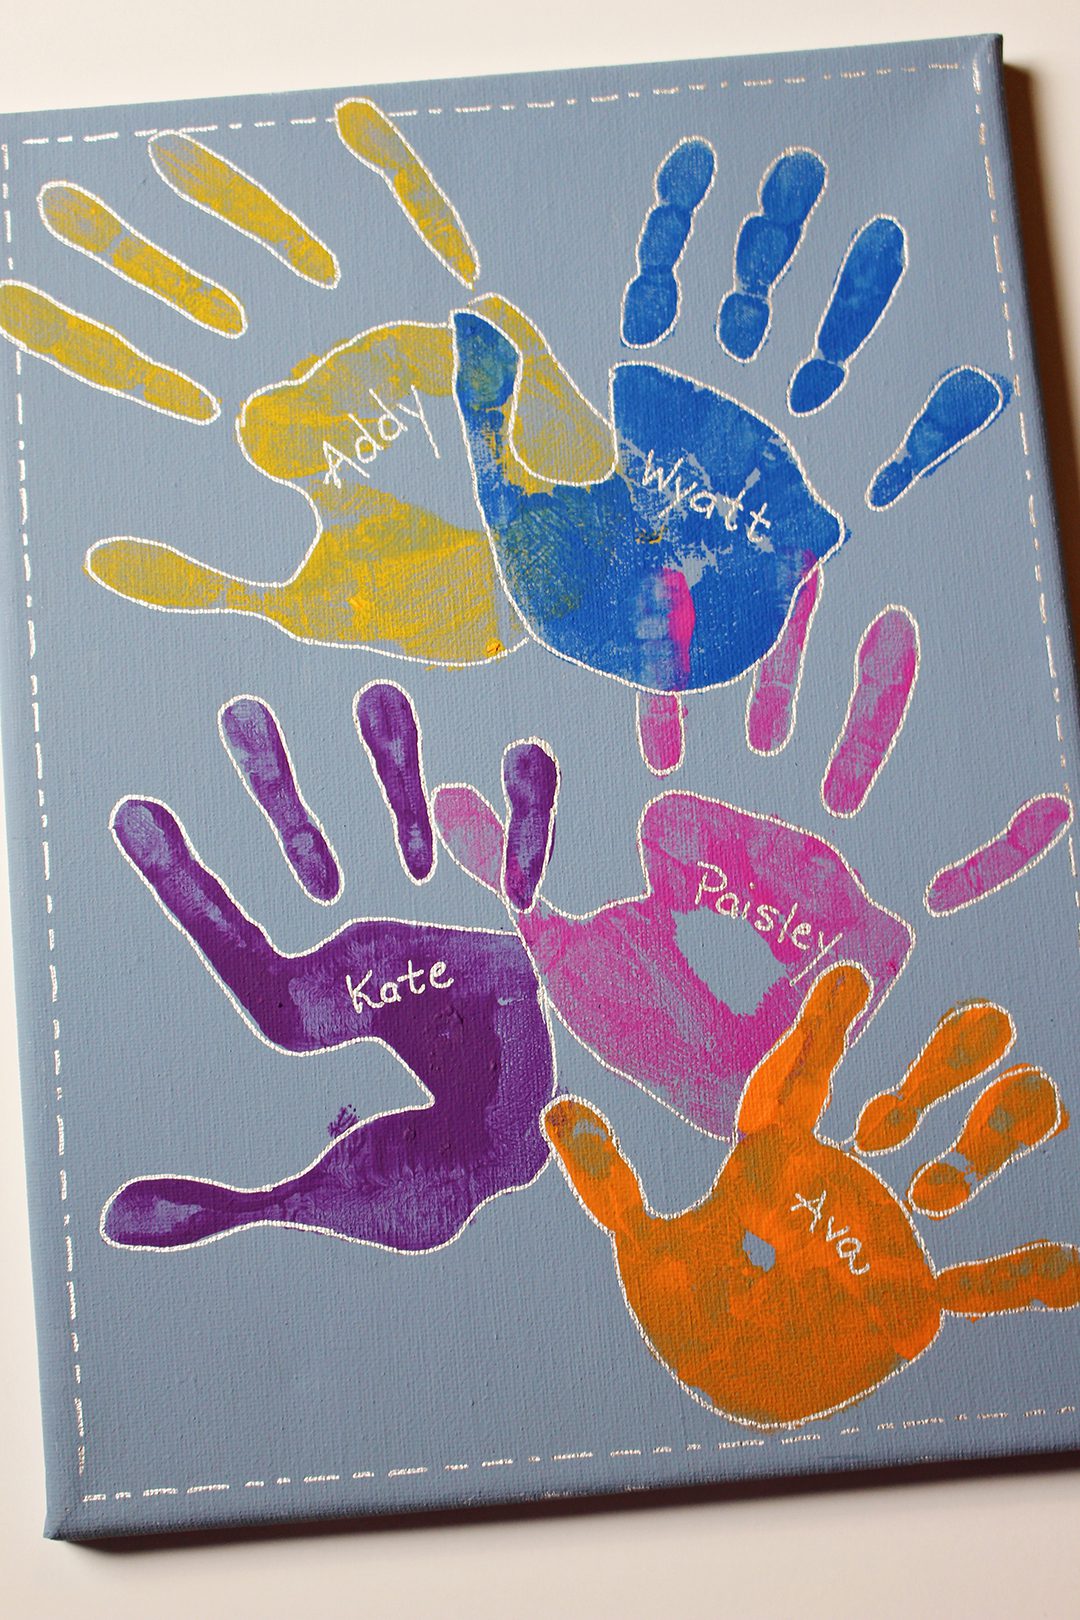 Painted handprints on a canvas with names written on them.